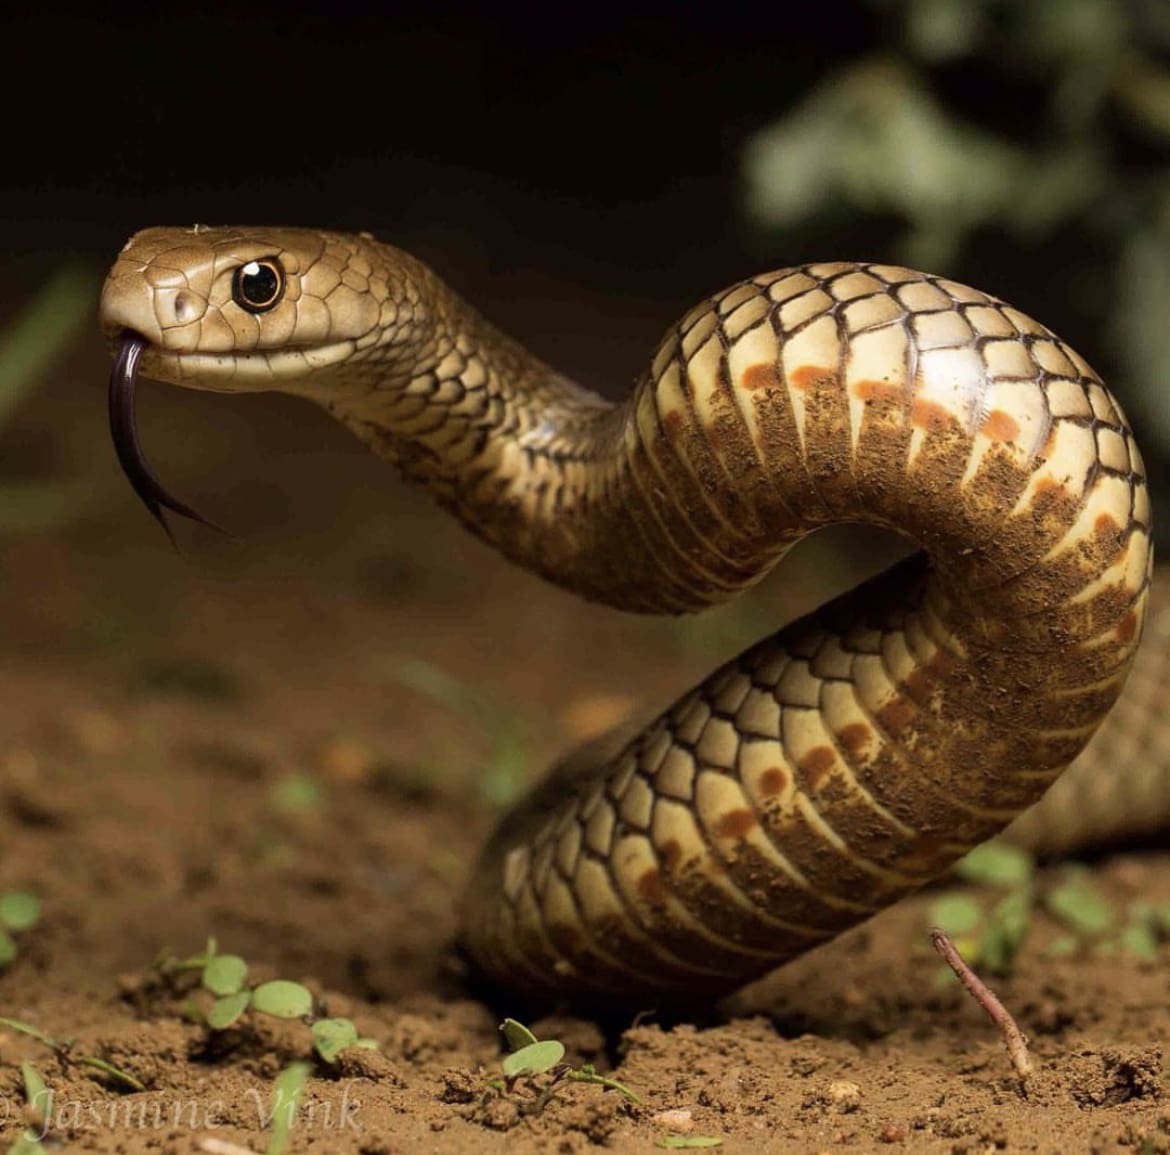 Eastern brown - one of the most venomous snakes in australia